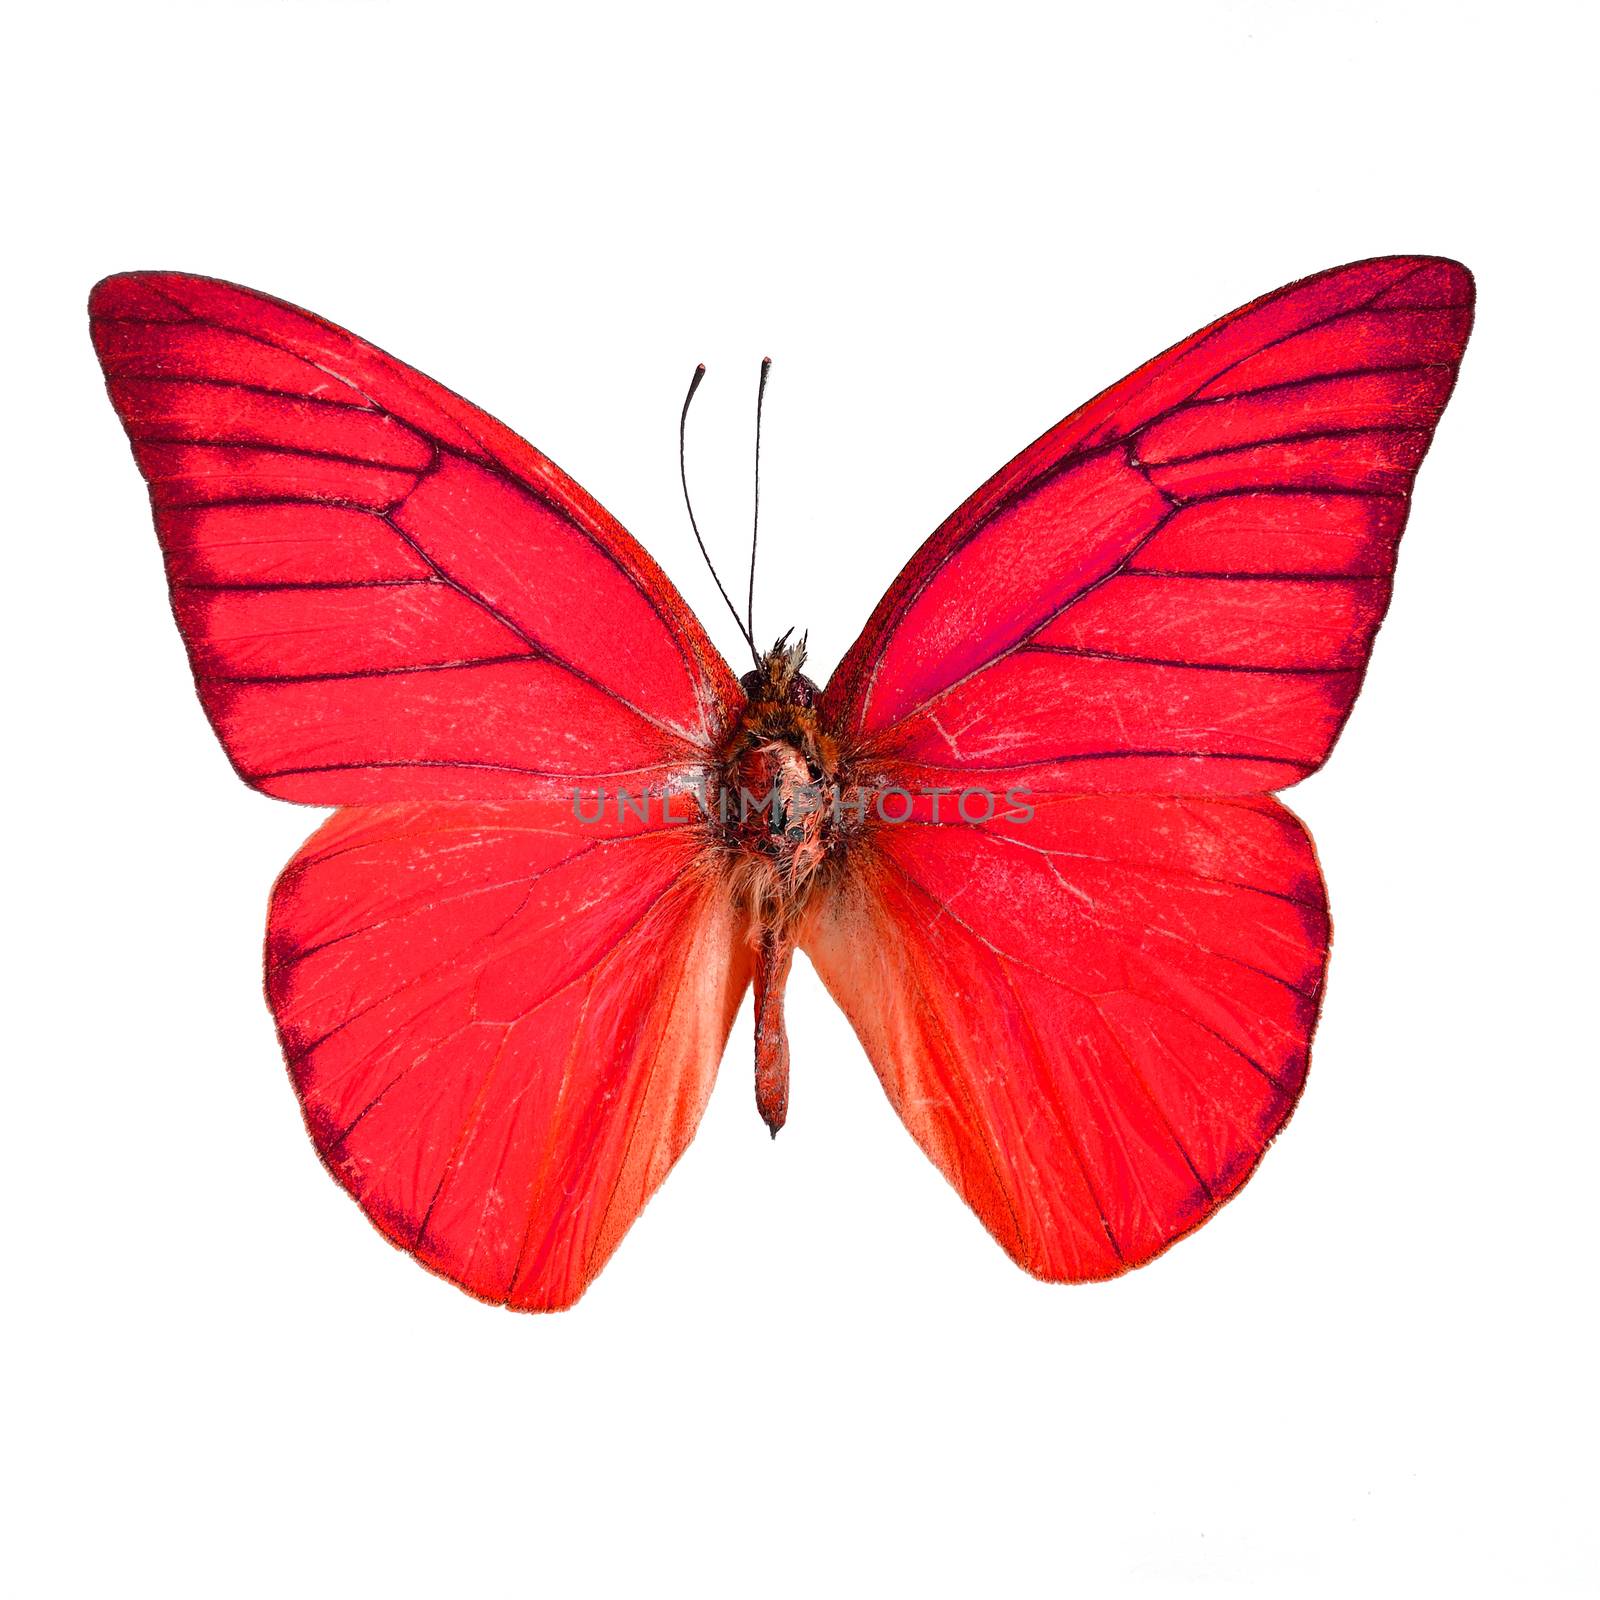 Red butterfly, Orange Albatross Butterfly (Appias nero galba) in fancy color profile, isolated on white background